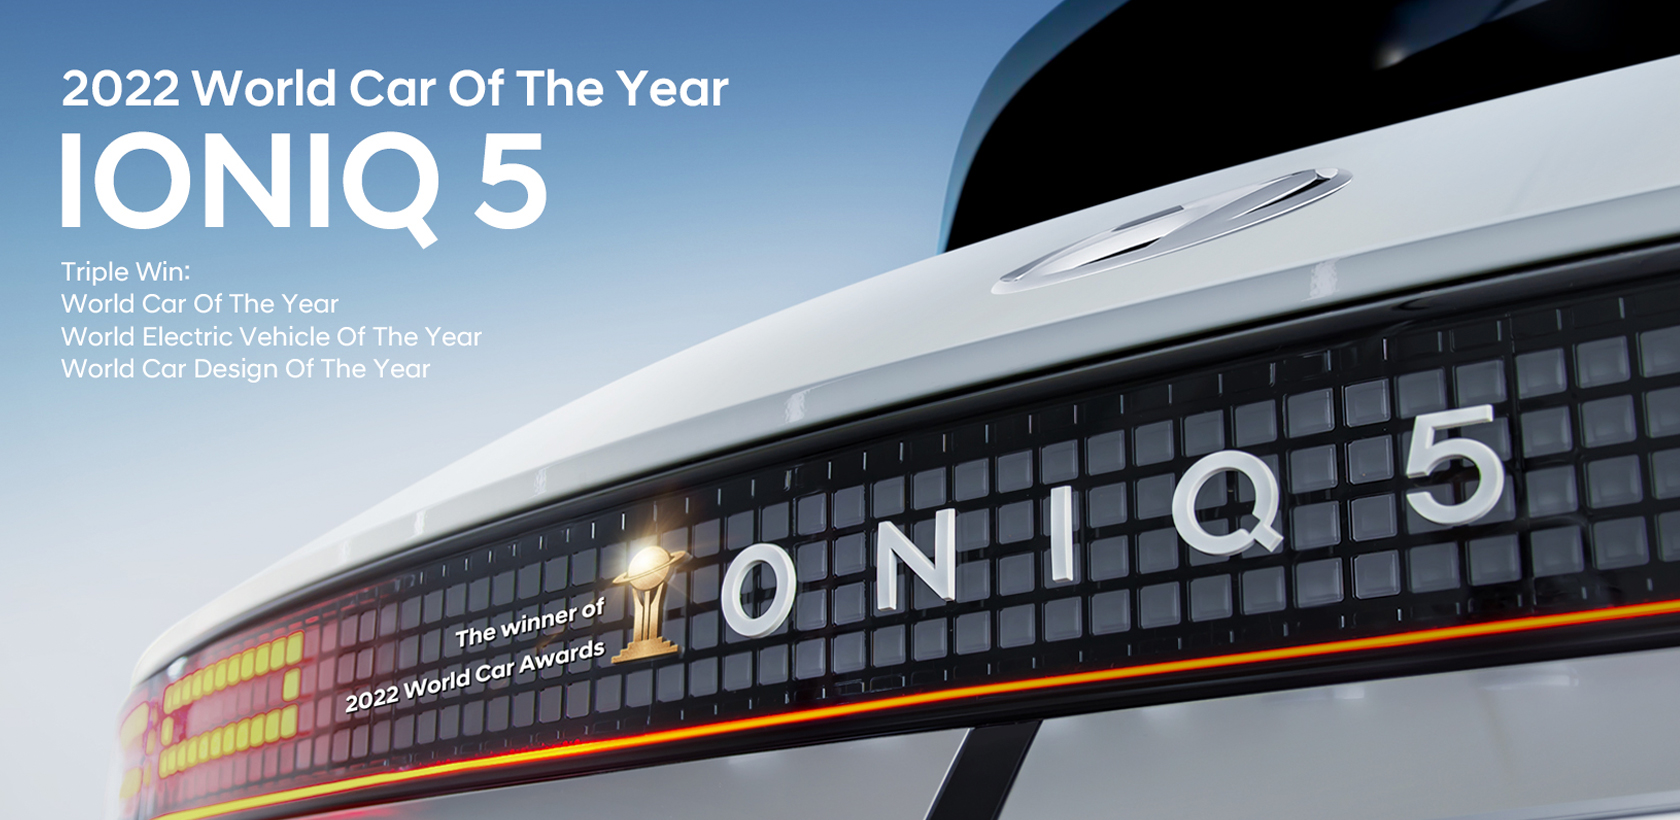 Hyundai IONIQ 5 décroche les prix « World Car of the Year », « Electric Vehicle of the Year » et « Car Design of the Year »